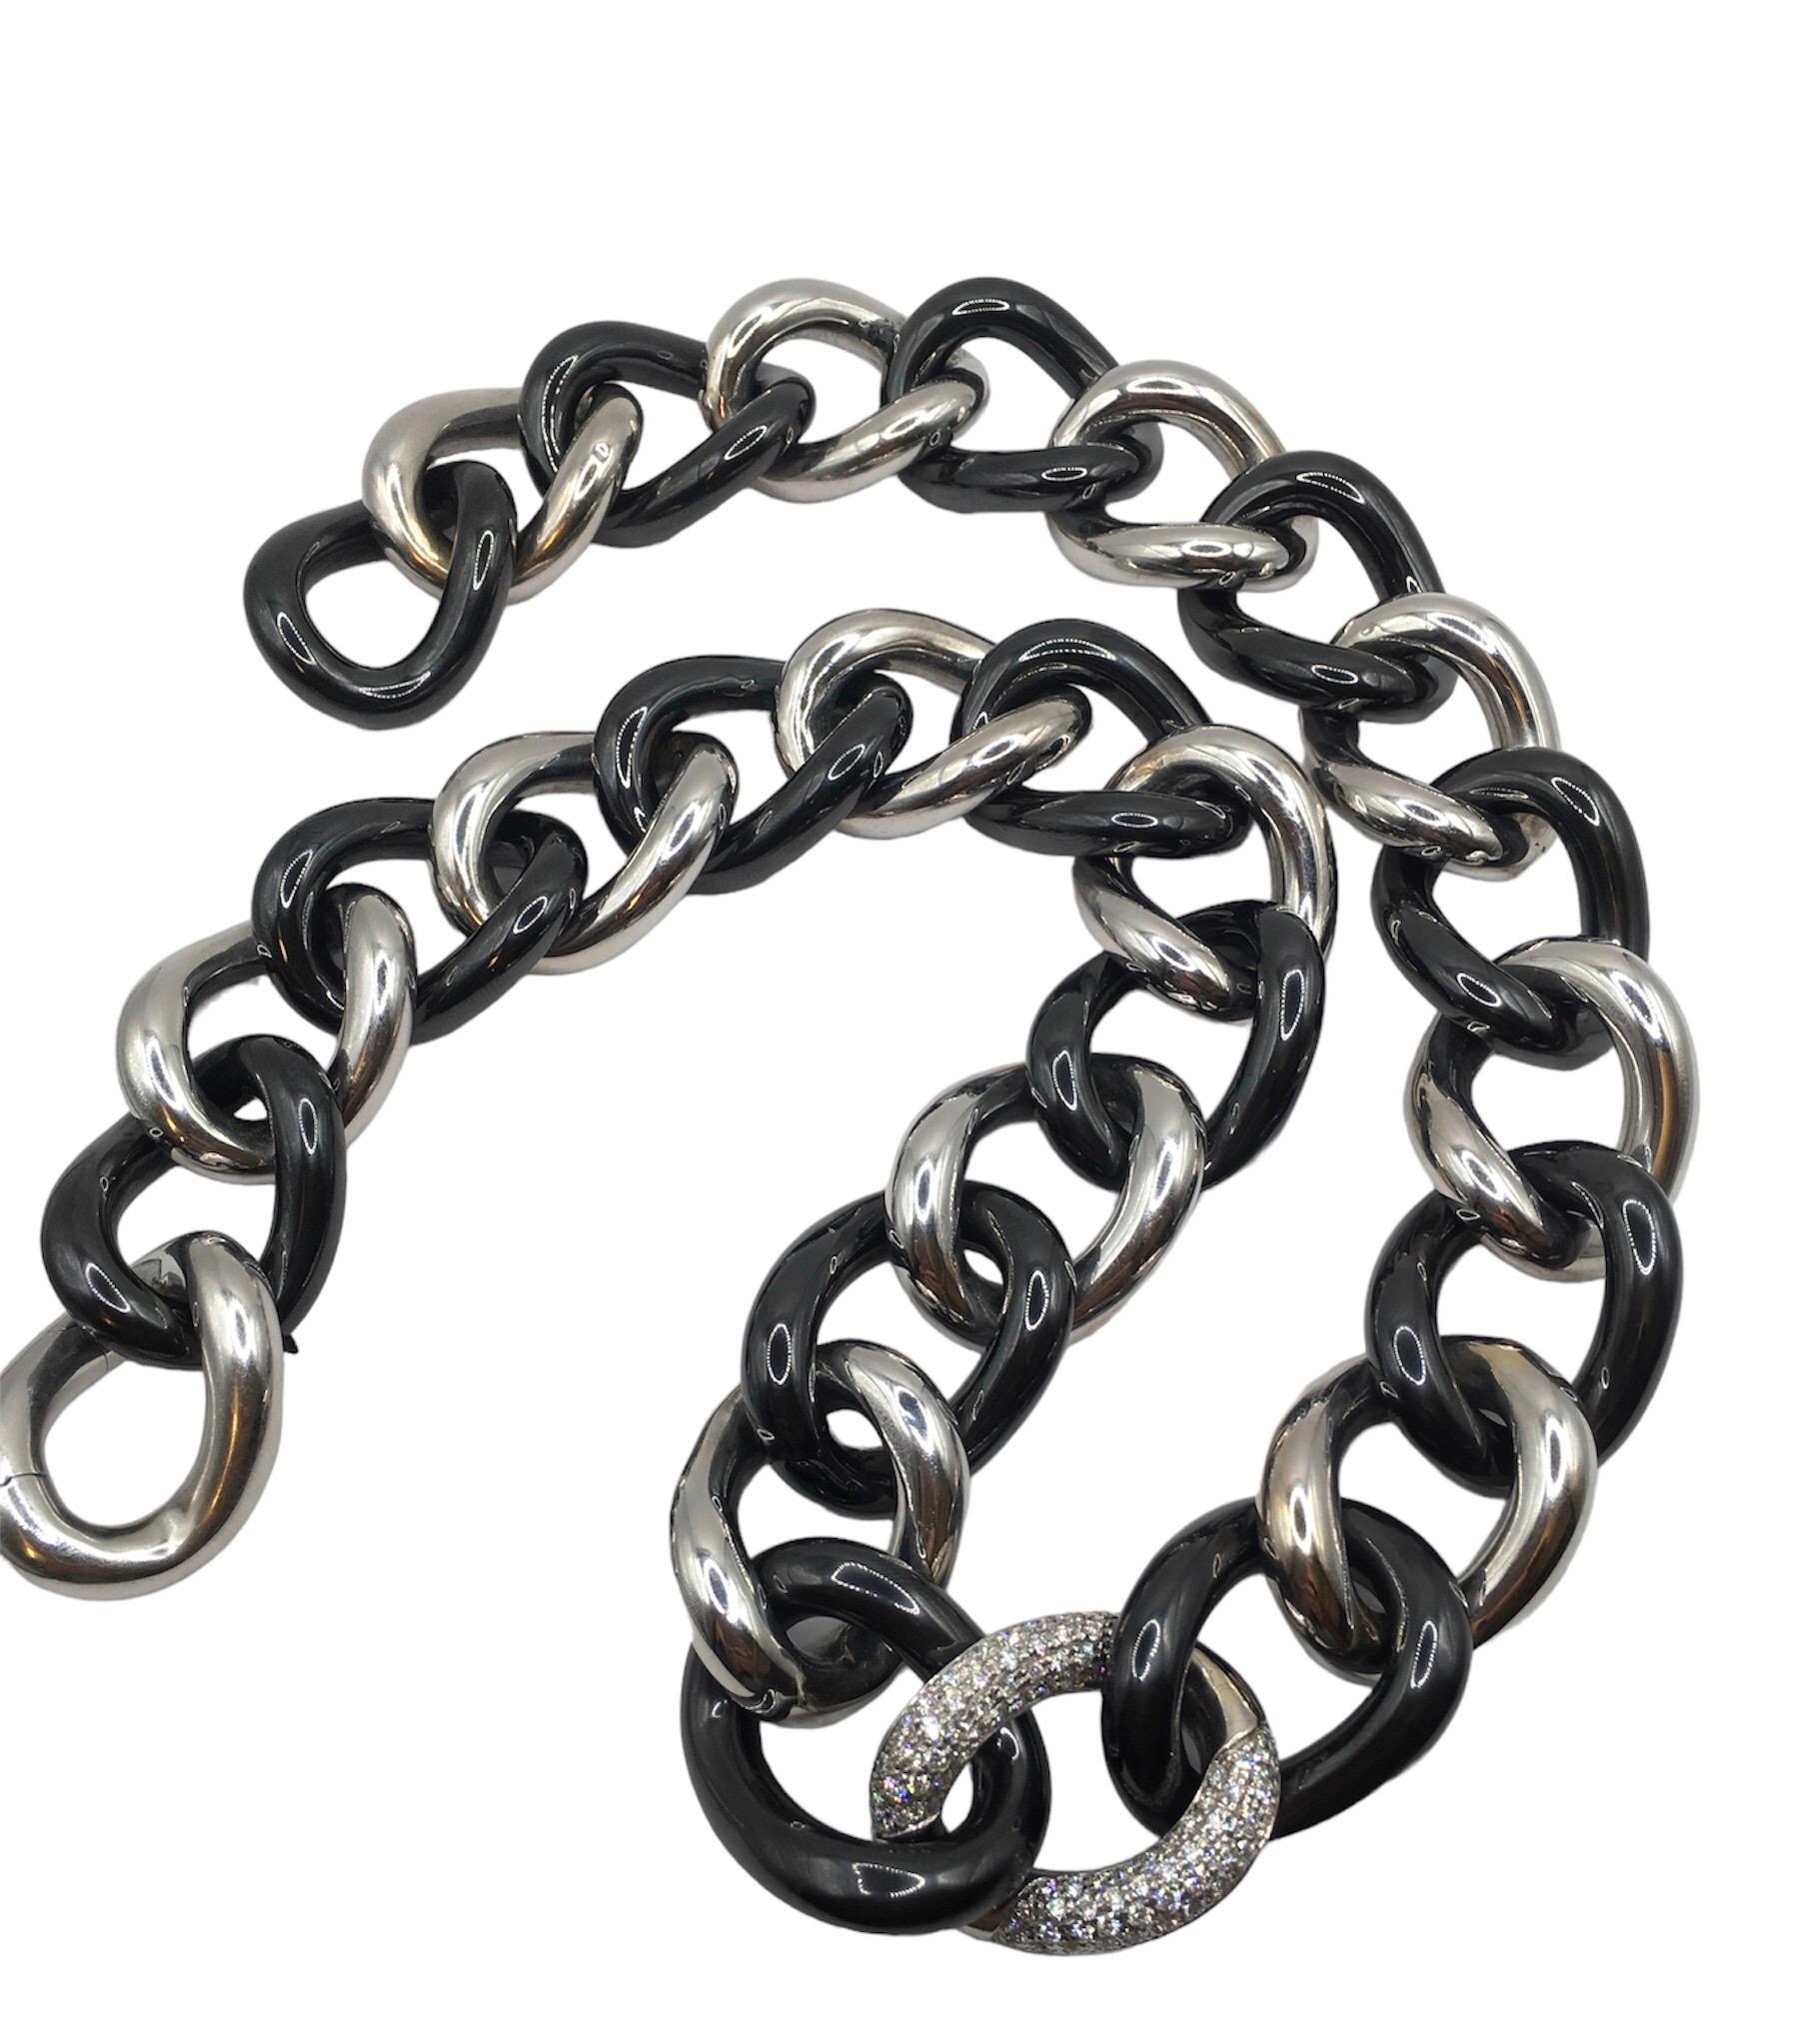 Black ceramic groumette necklace in 18 kt white gold
The ceramic is a very resistant material. 
This iconic collection in Micheletto tradition was originally made only in gold just more or less 10 years ago it became very popular the ceramic